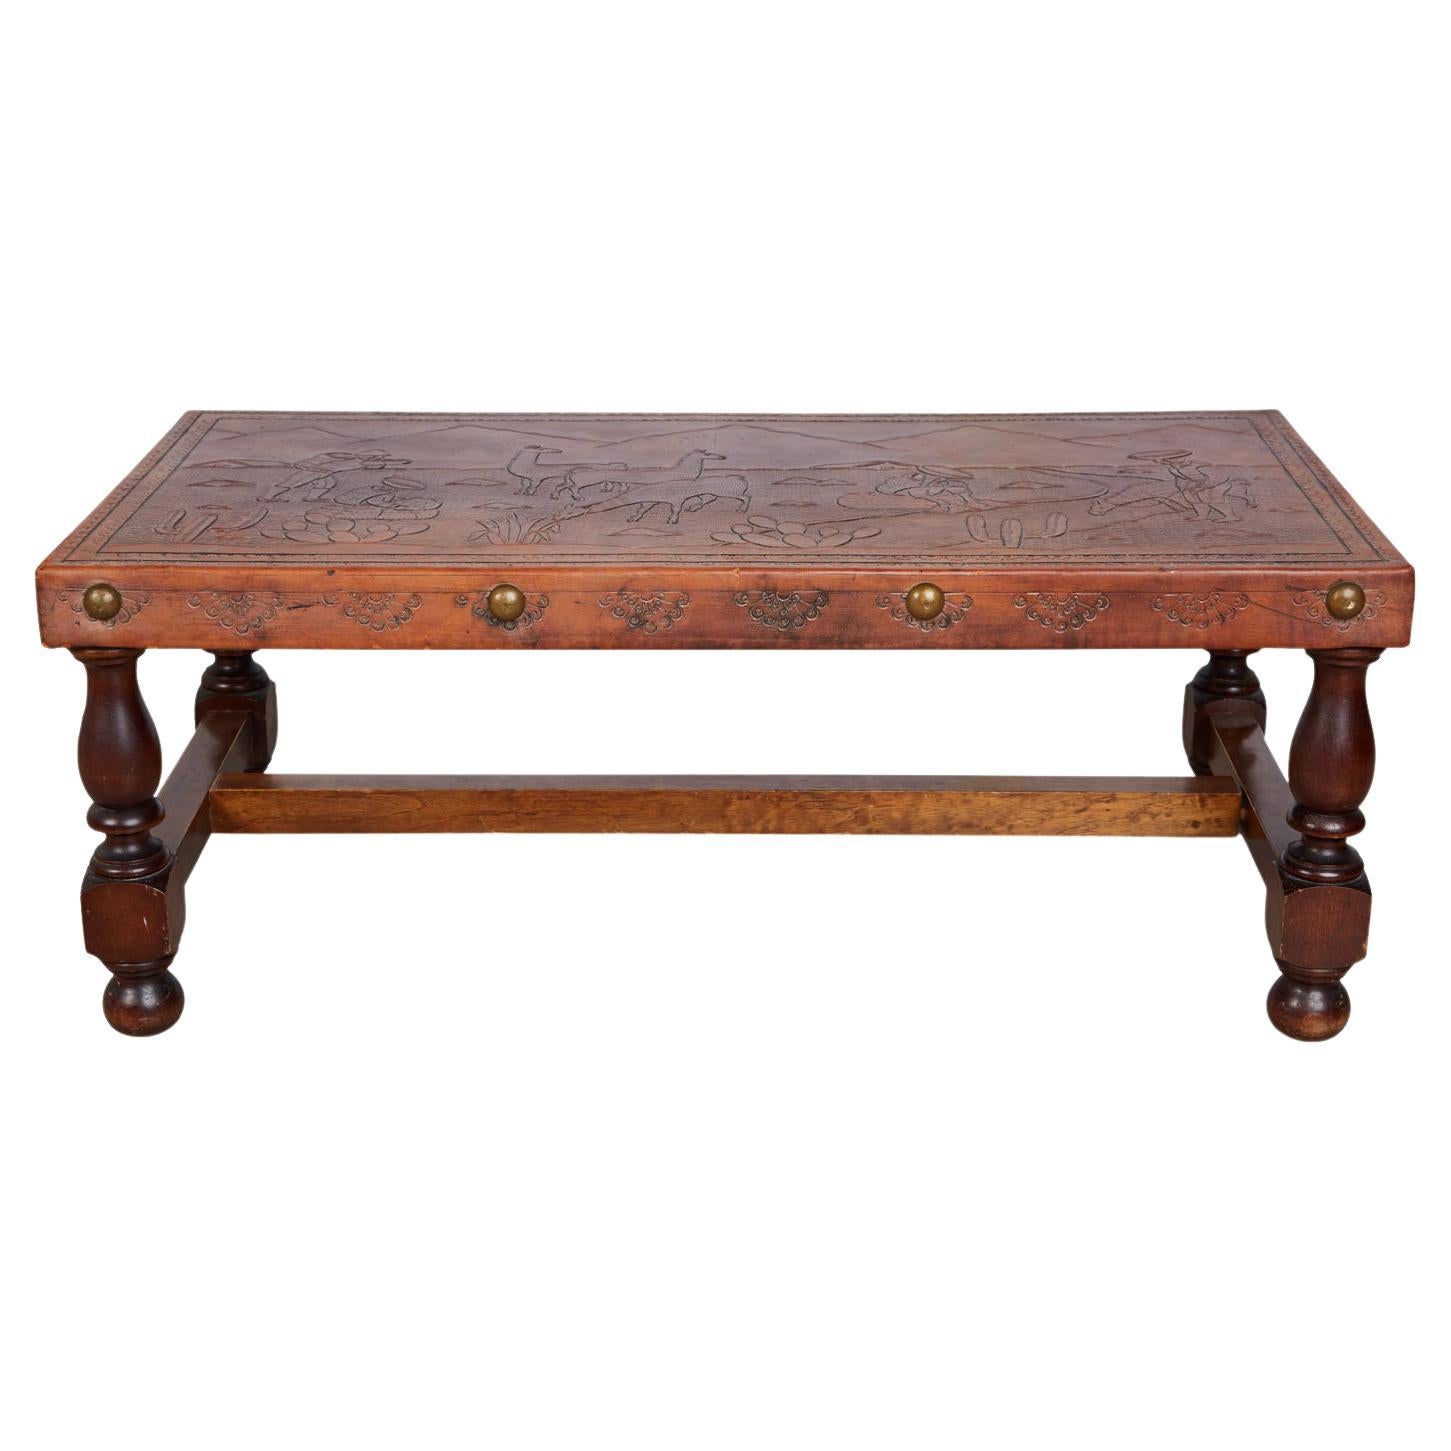 Peruvian Tooled Leather Bench or Coffee Table with South American Landscape